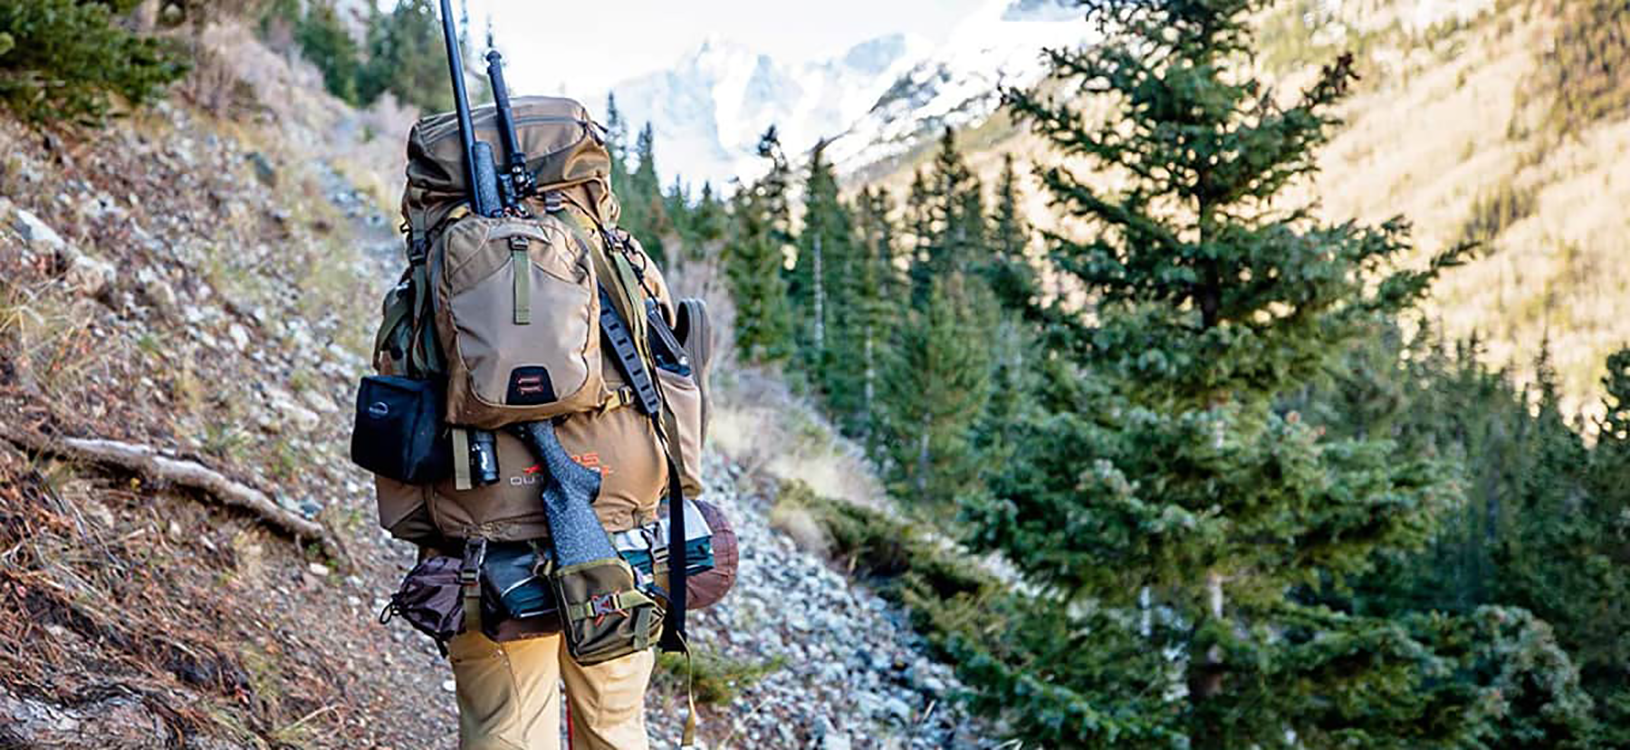 How to choose the best backpack for hunting